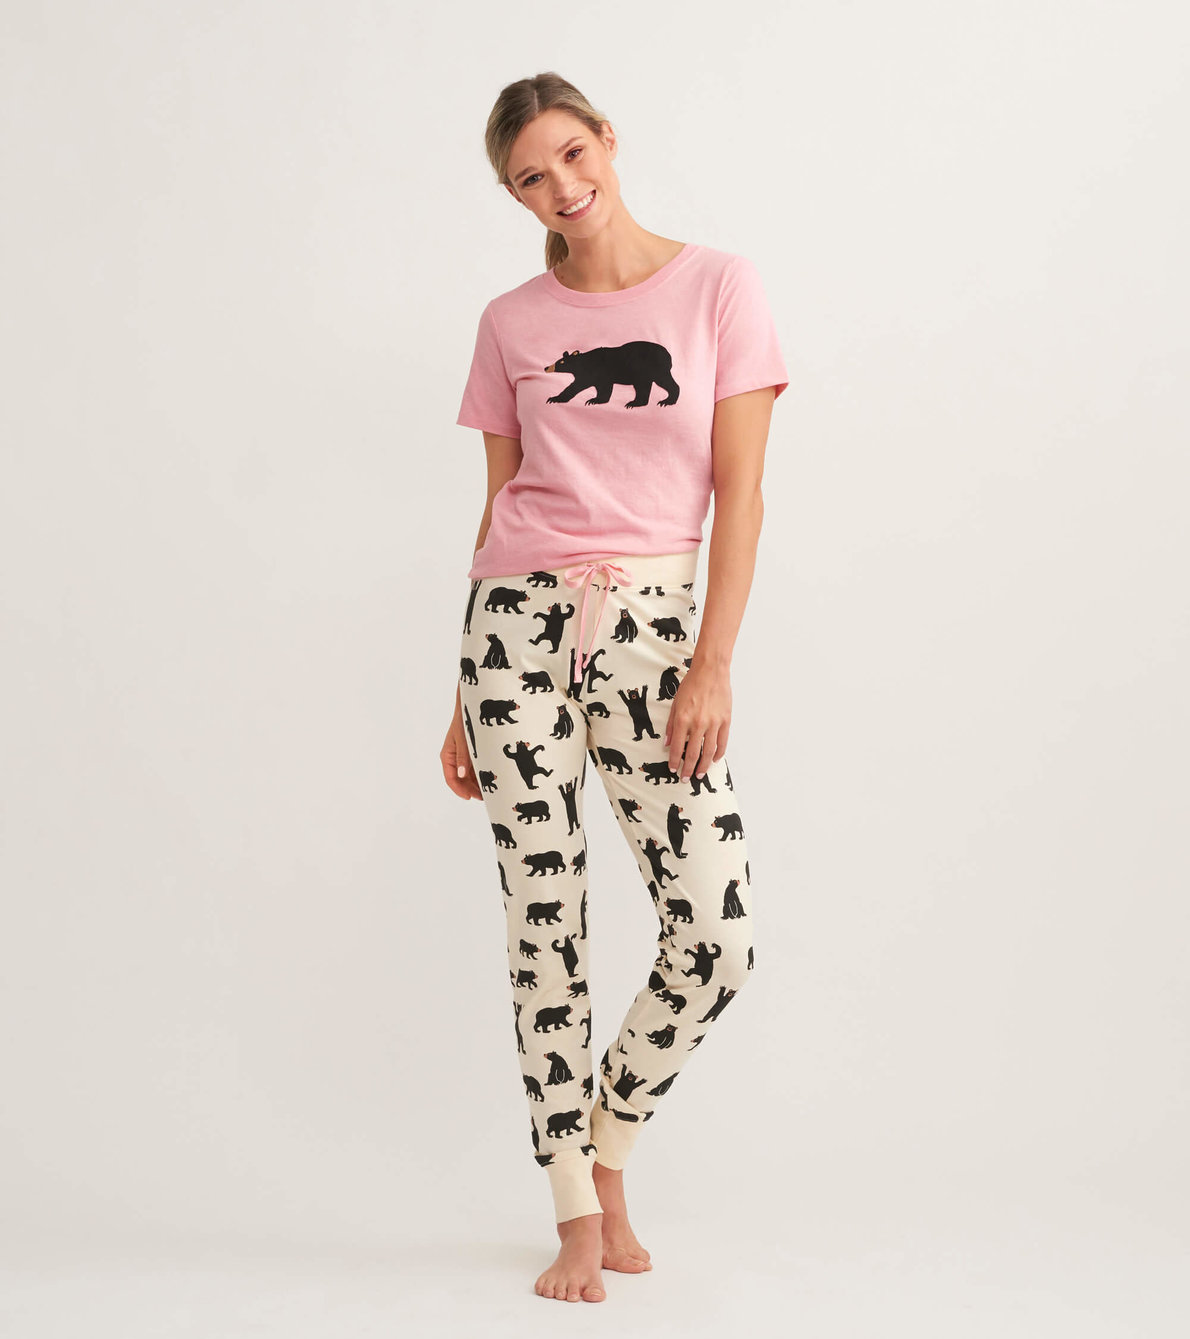 View larger image of Classic Bears Women's Tee and Leggings Pajama Separates